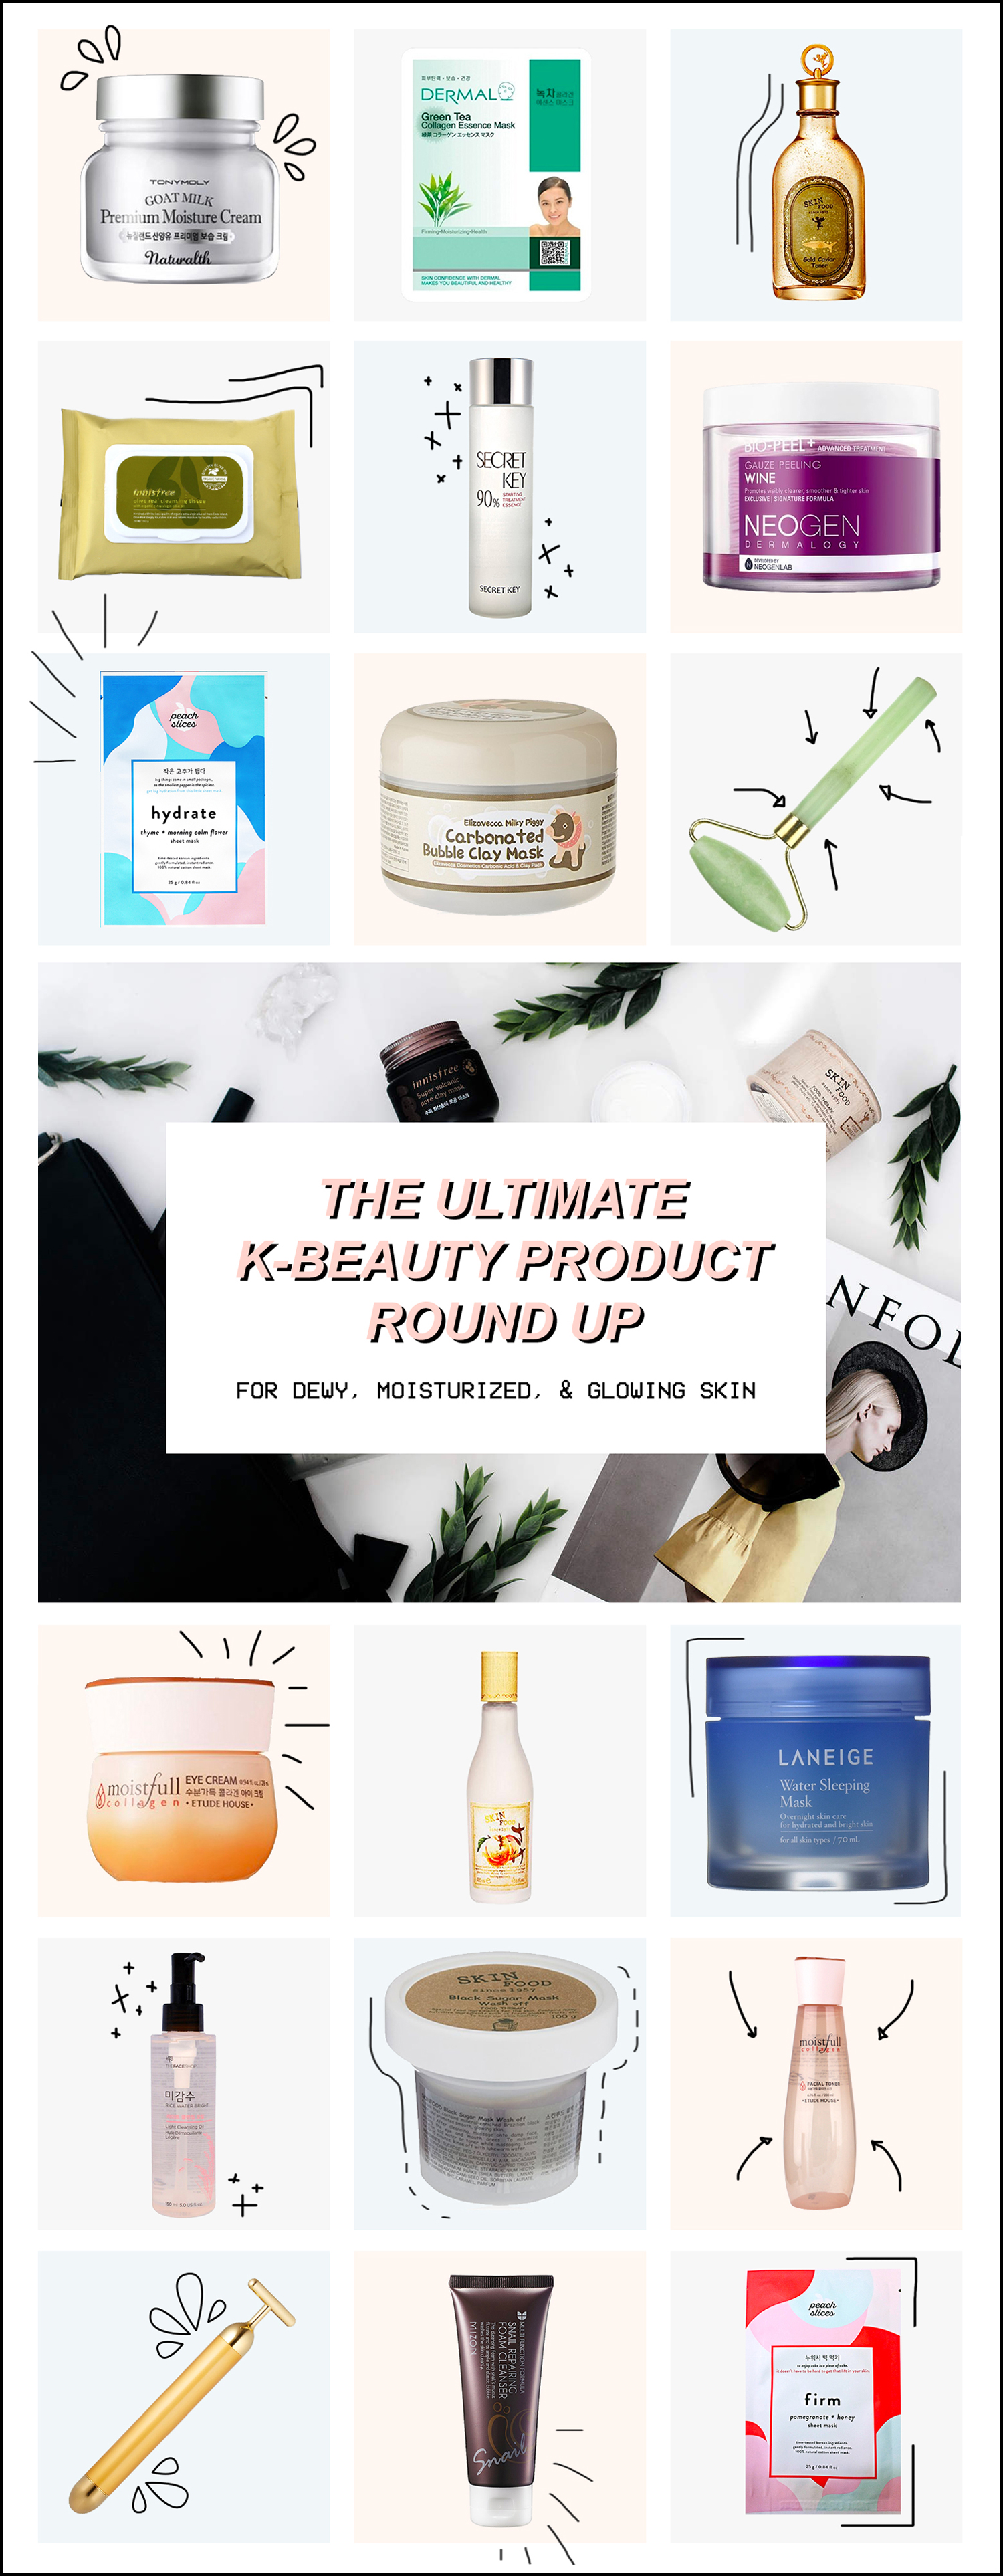 The Ultimate Korean Beauty Product Roundup by Erica Stolman of Fashionlush